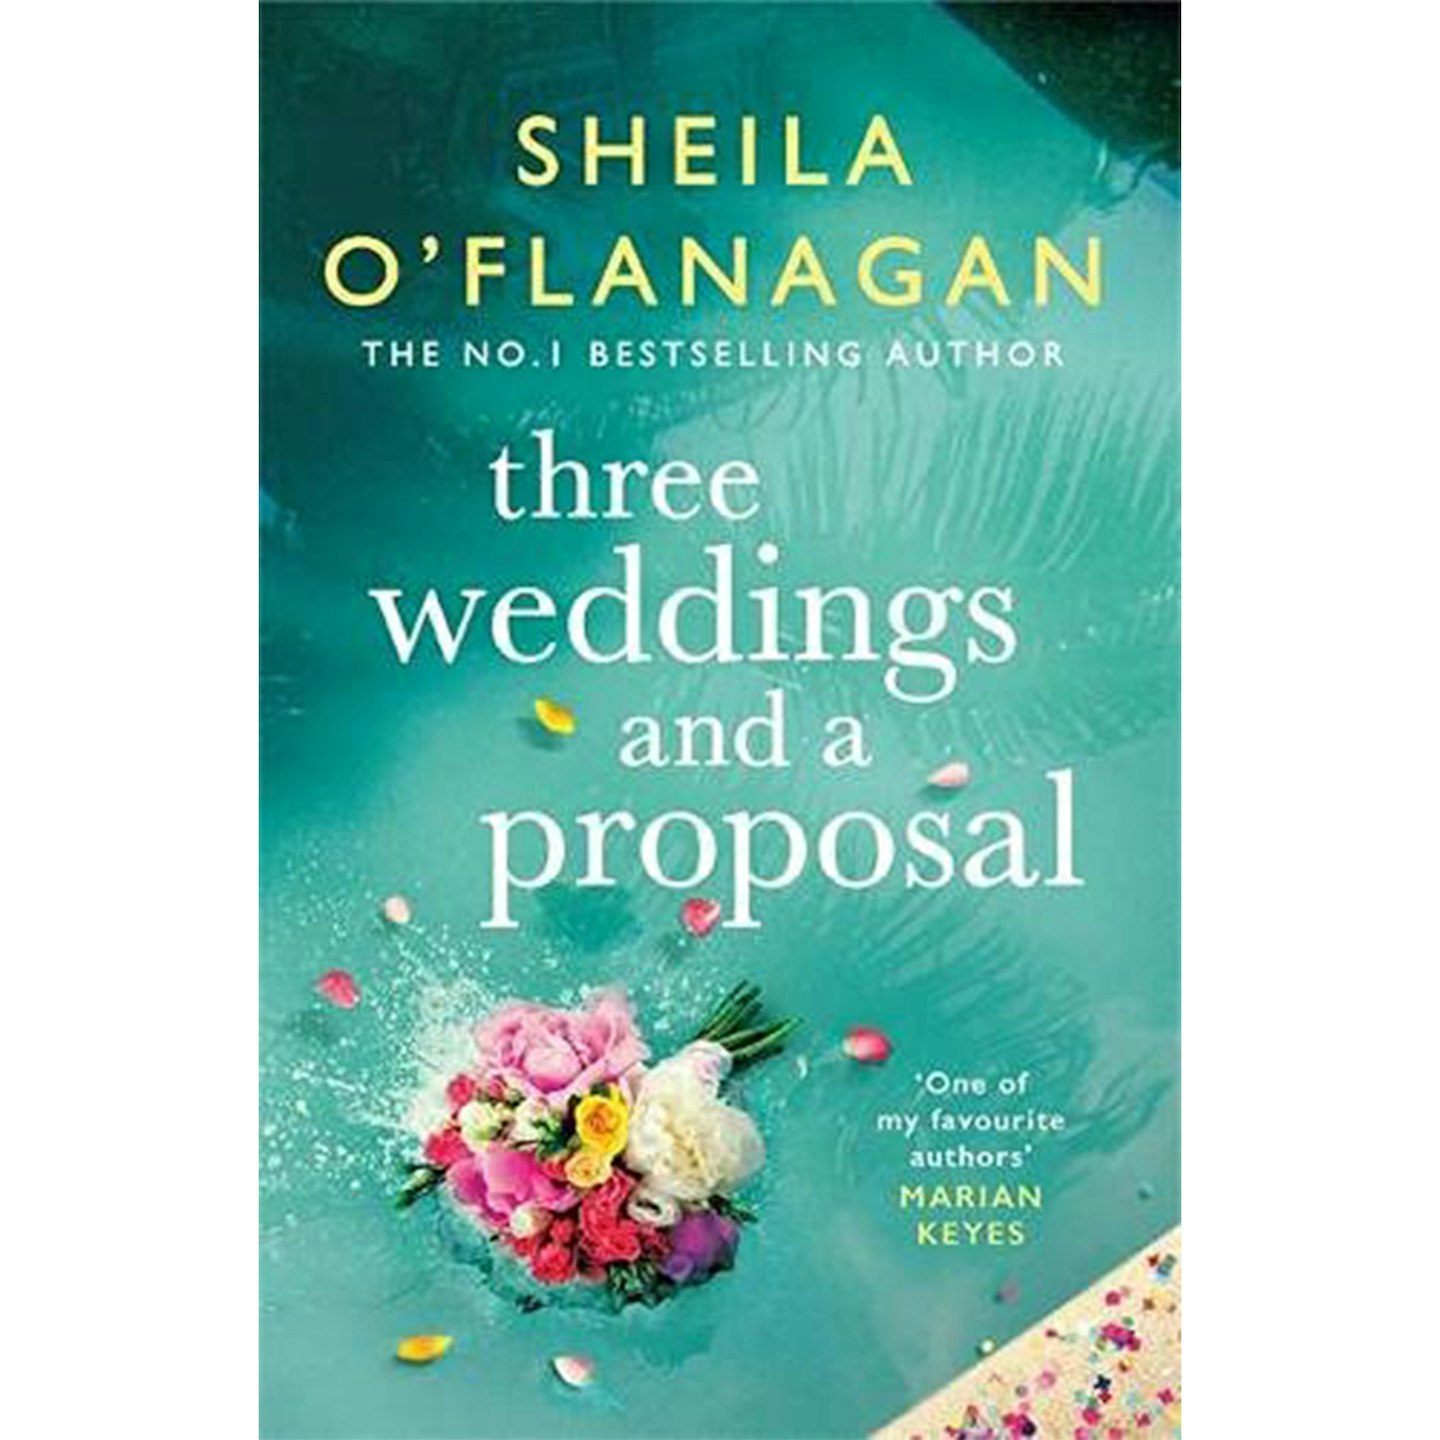 Three Weddings and a Proposal